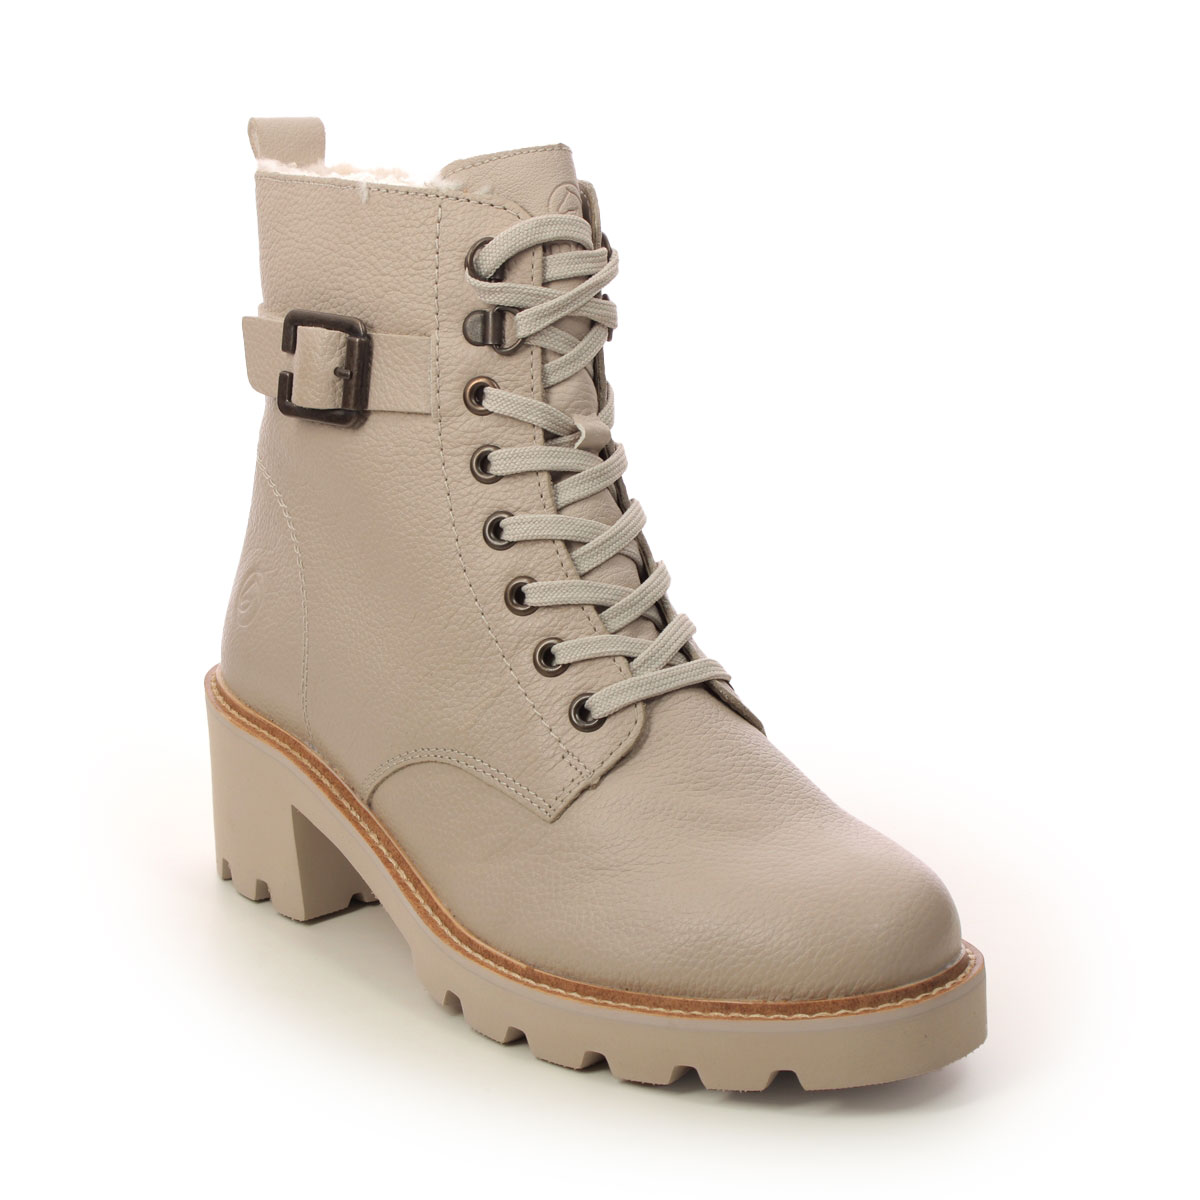 Remonte Bodola Beige Leather Womens Lace Up Boots D0A74-60 In Size 40 In Plain Beige Leather